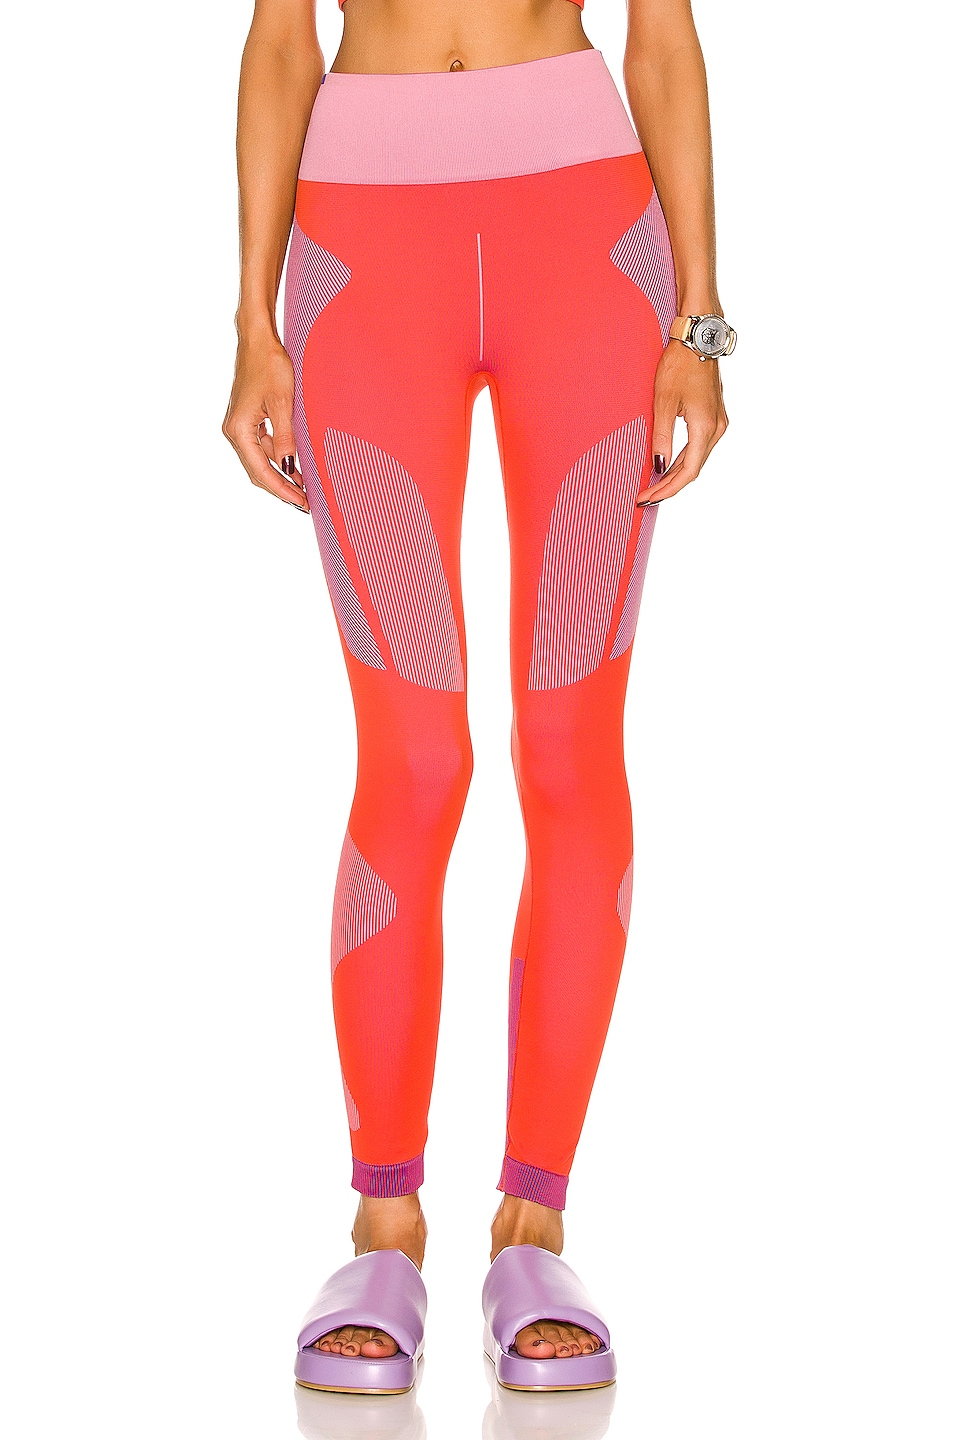 Image 1 of adidas by Stella McCartney Tight Legging in Actora, Easpink, & Boblue